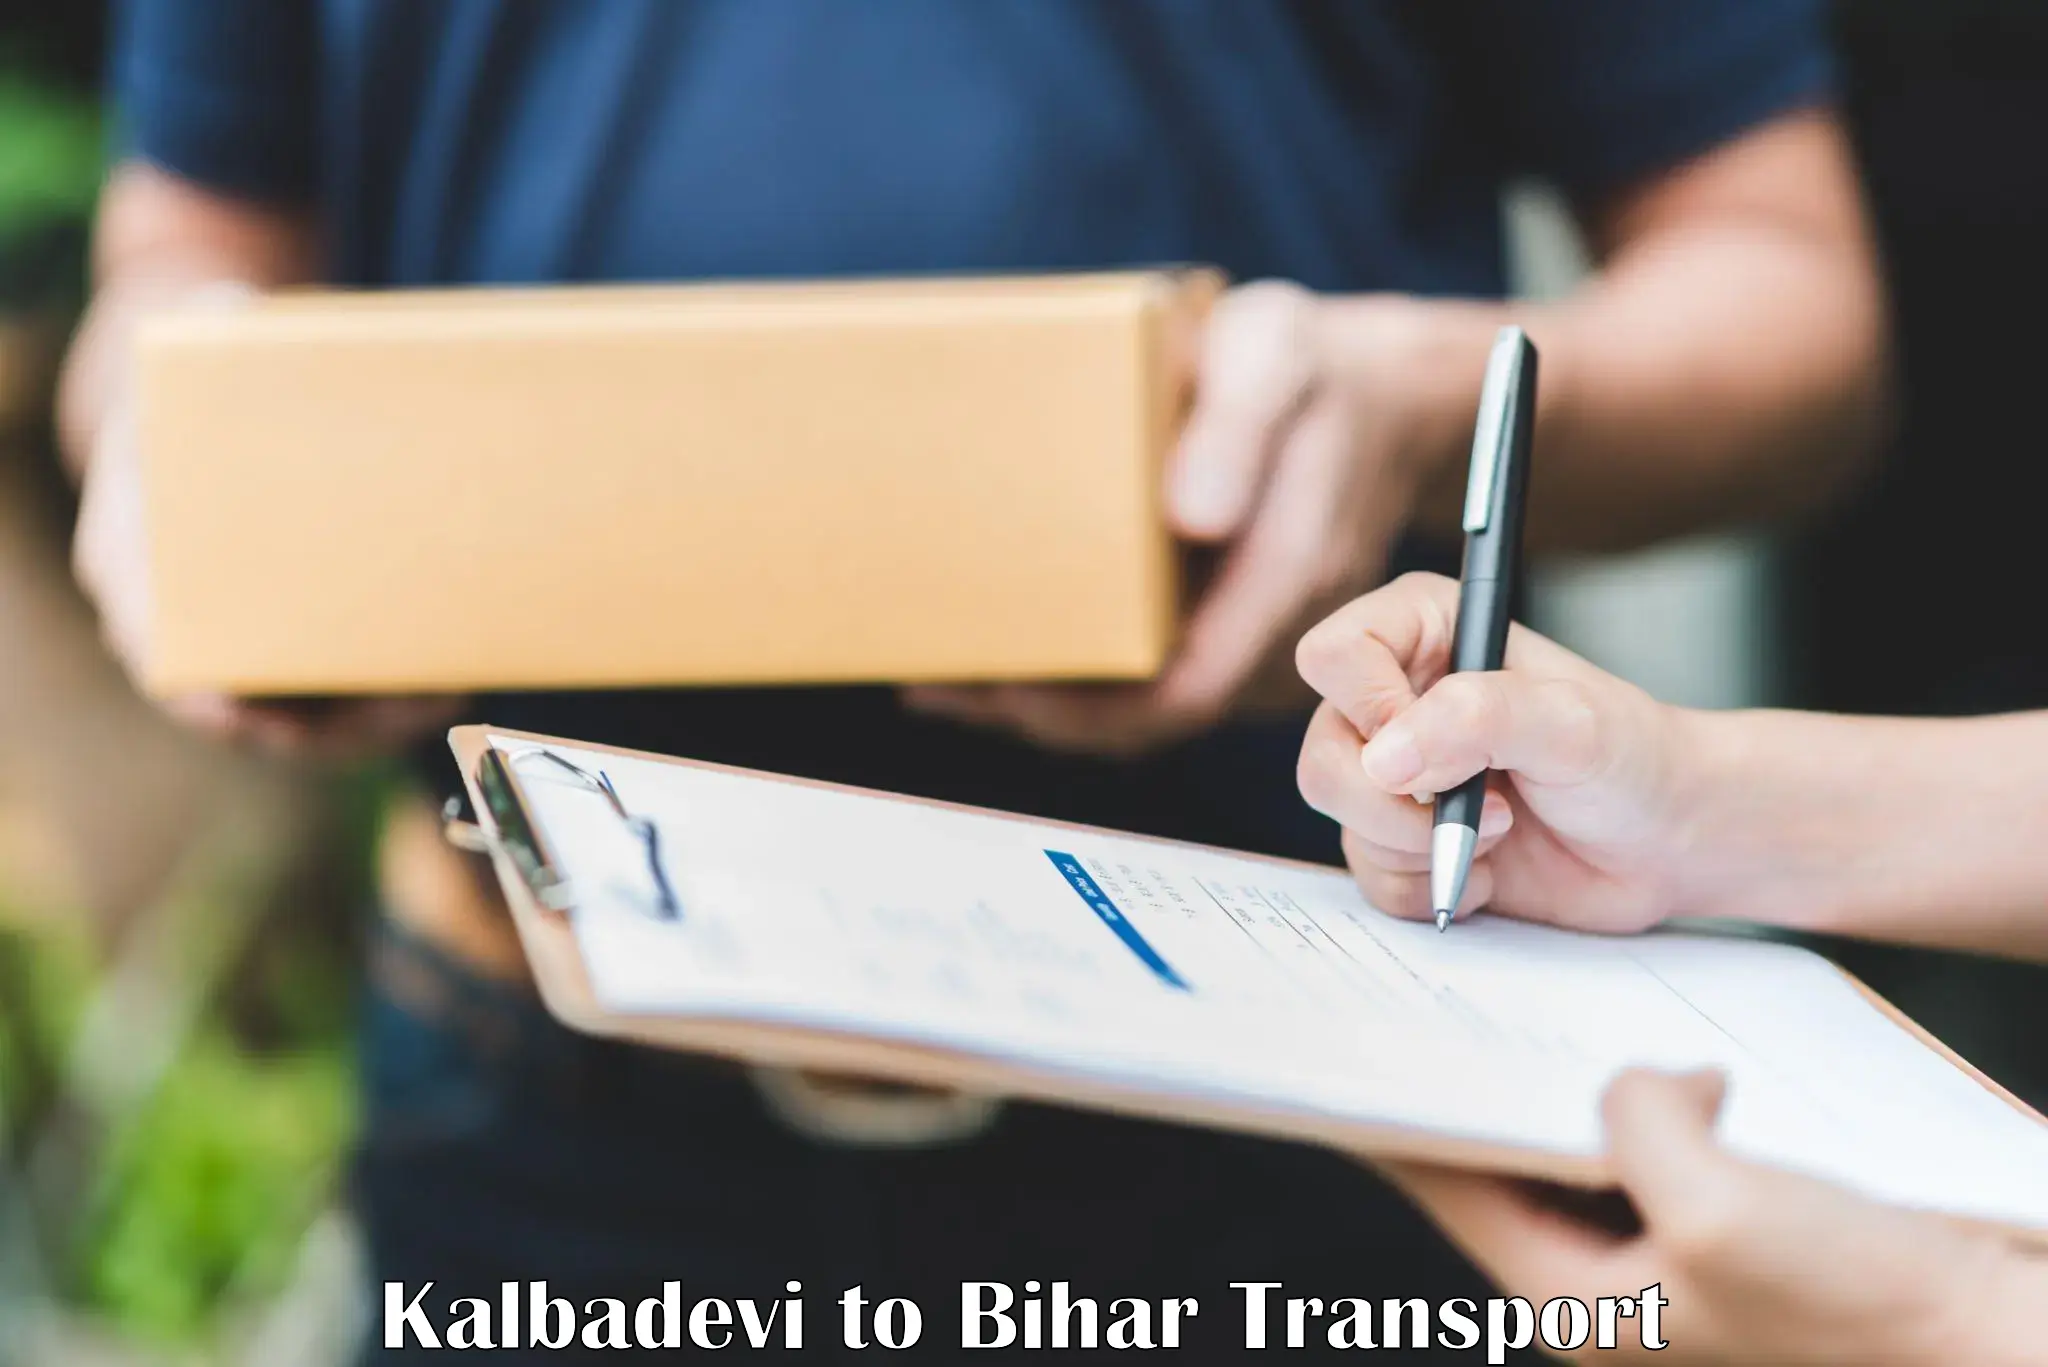 Container transport service Kalbadevi to Bihar